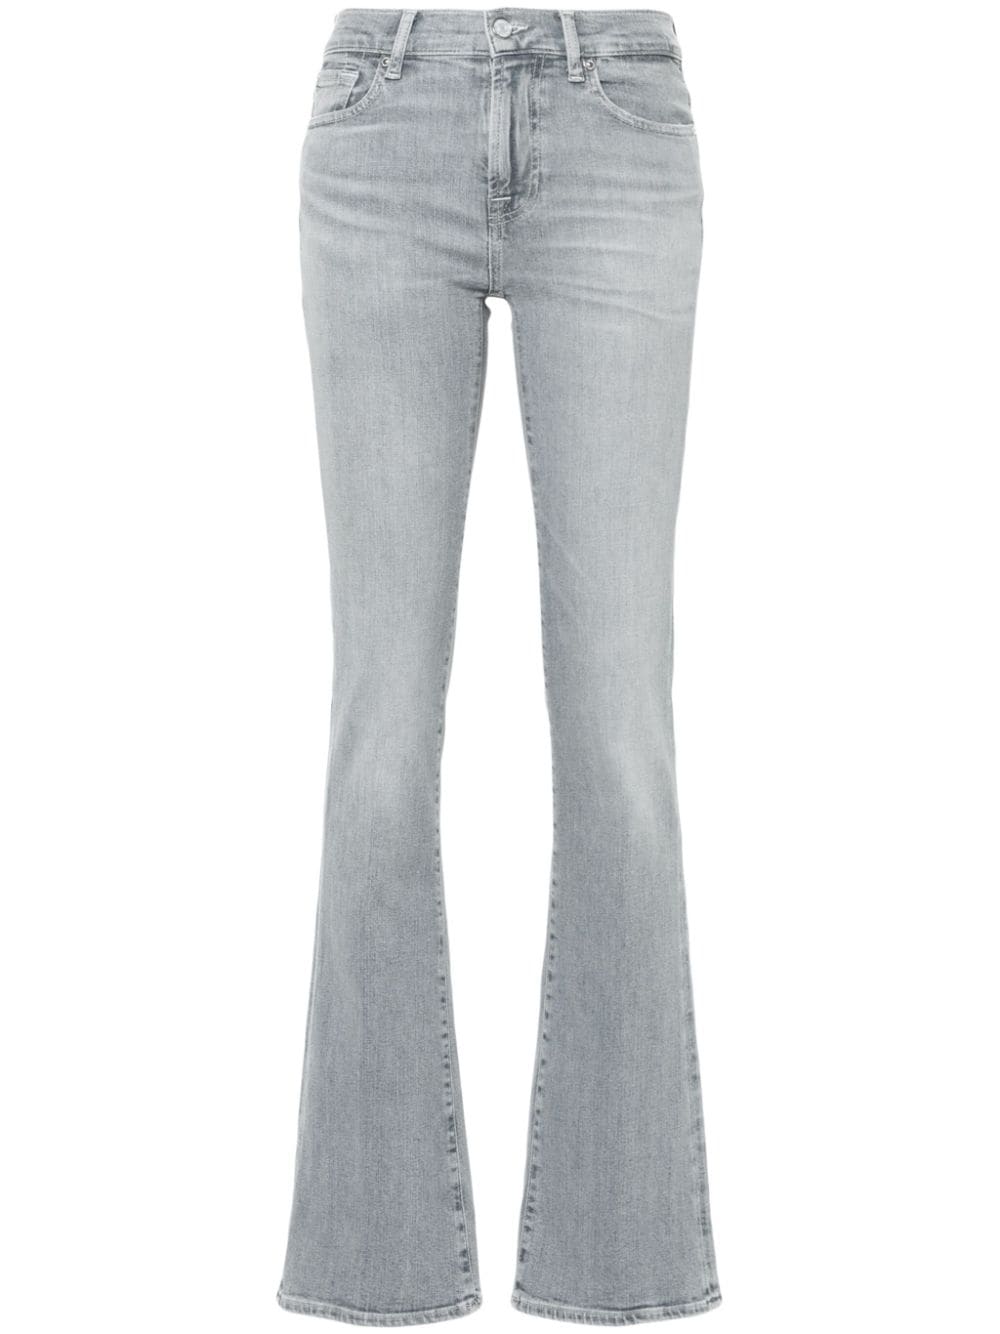 7 For All Mankind Illusion Space mid-rise bootcut jeans - Grey von 7 For All Mankind